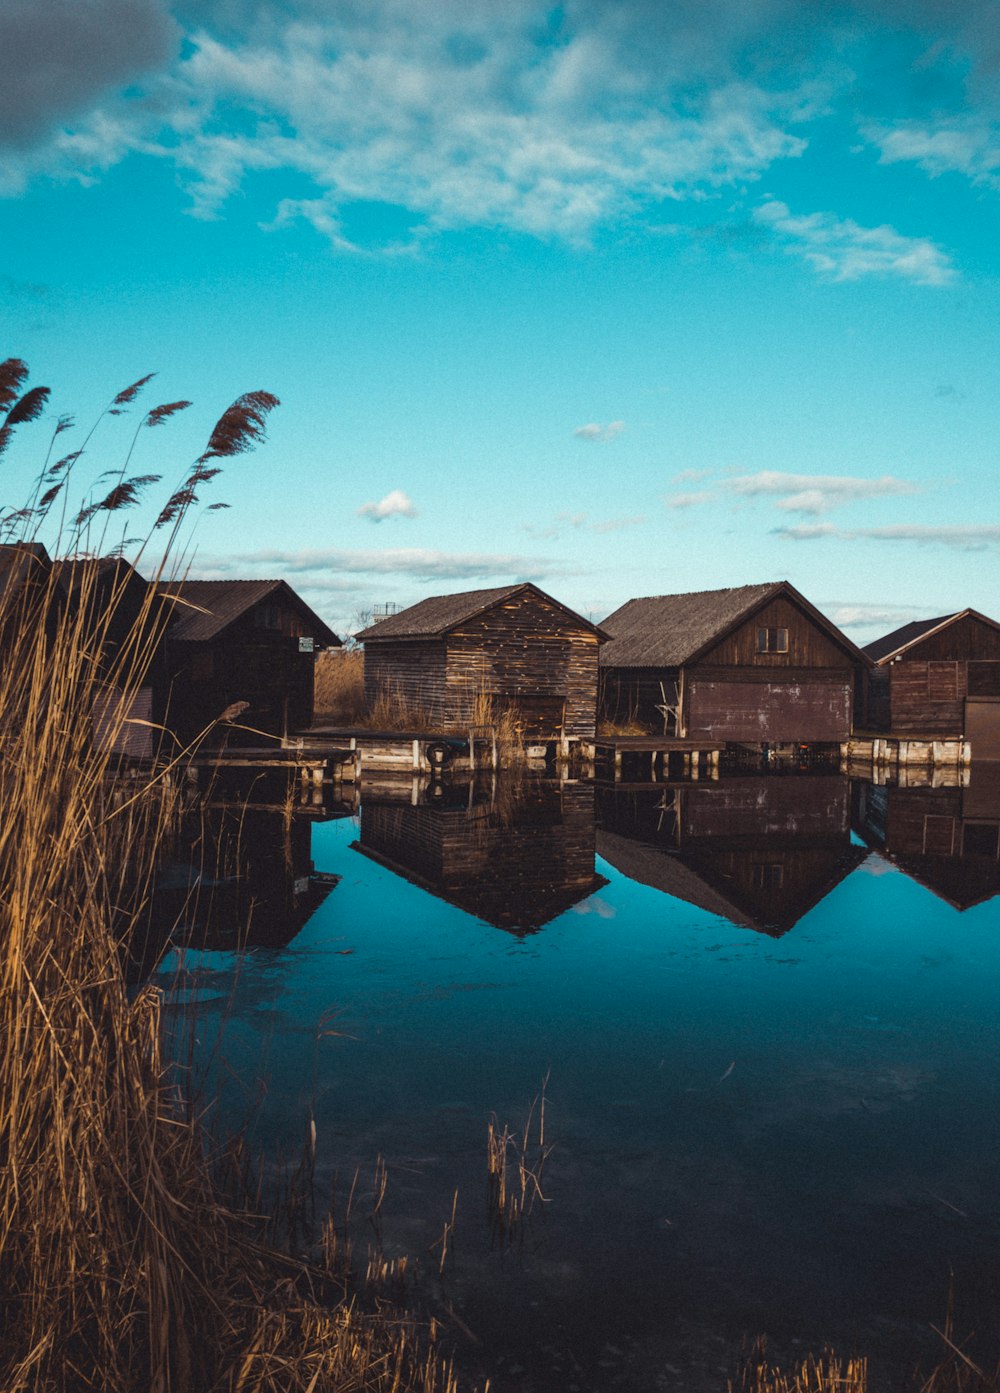 a body of water surrounded by wooden houses